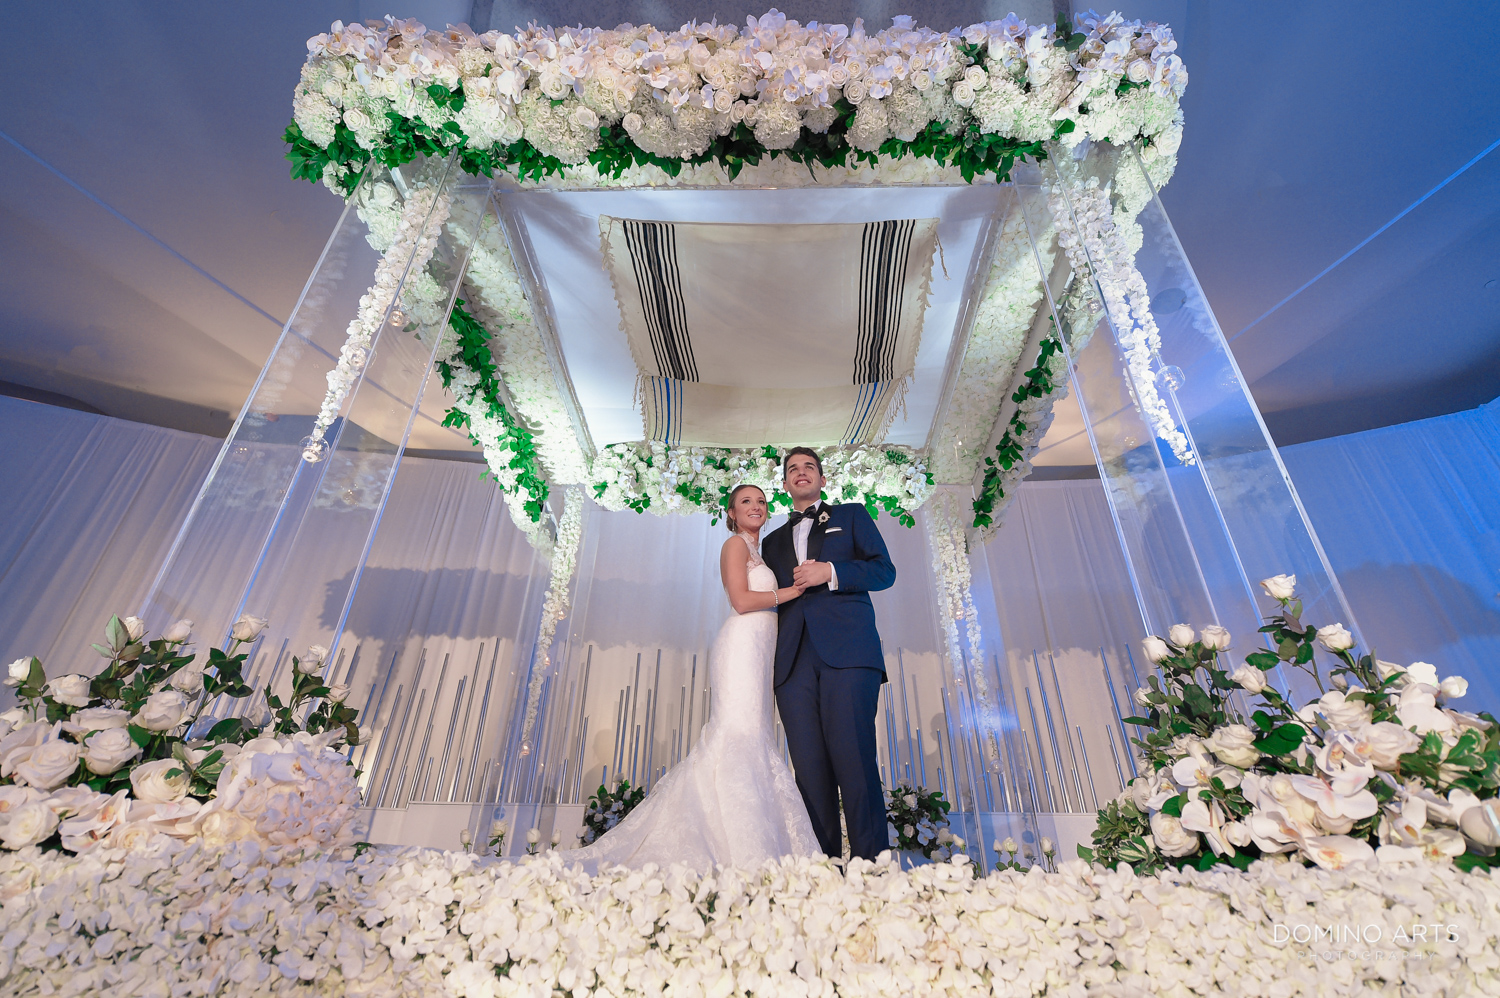 chuppah full of flowers Classic romantic wedding photos at fontainebleau miami